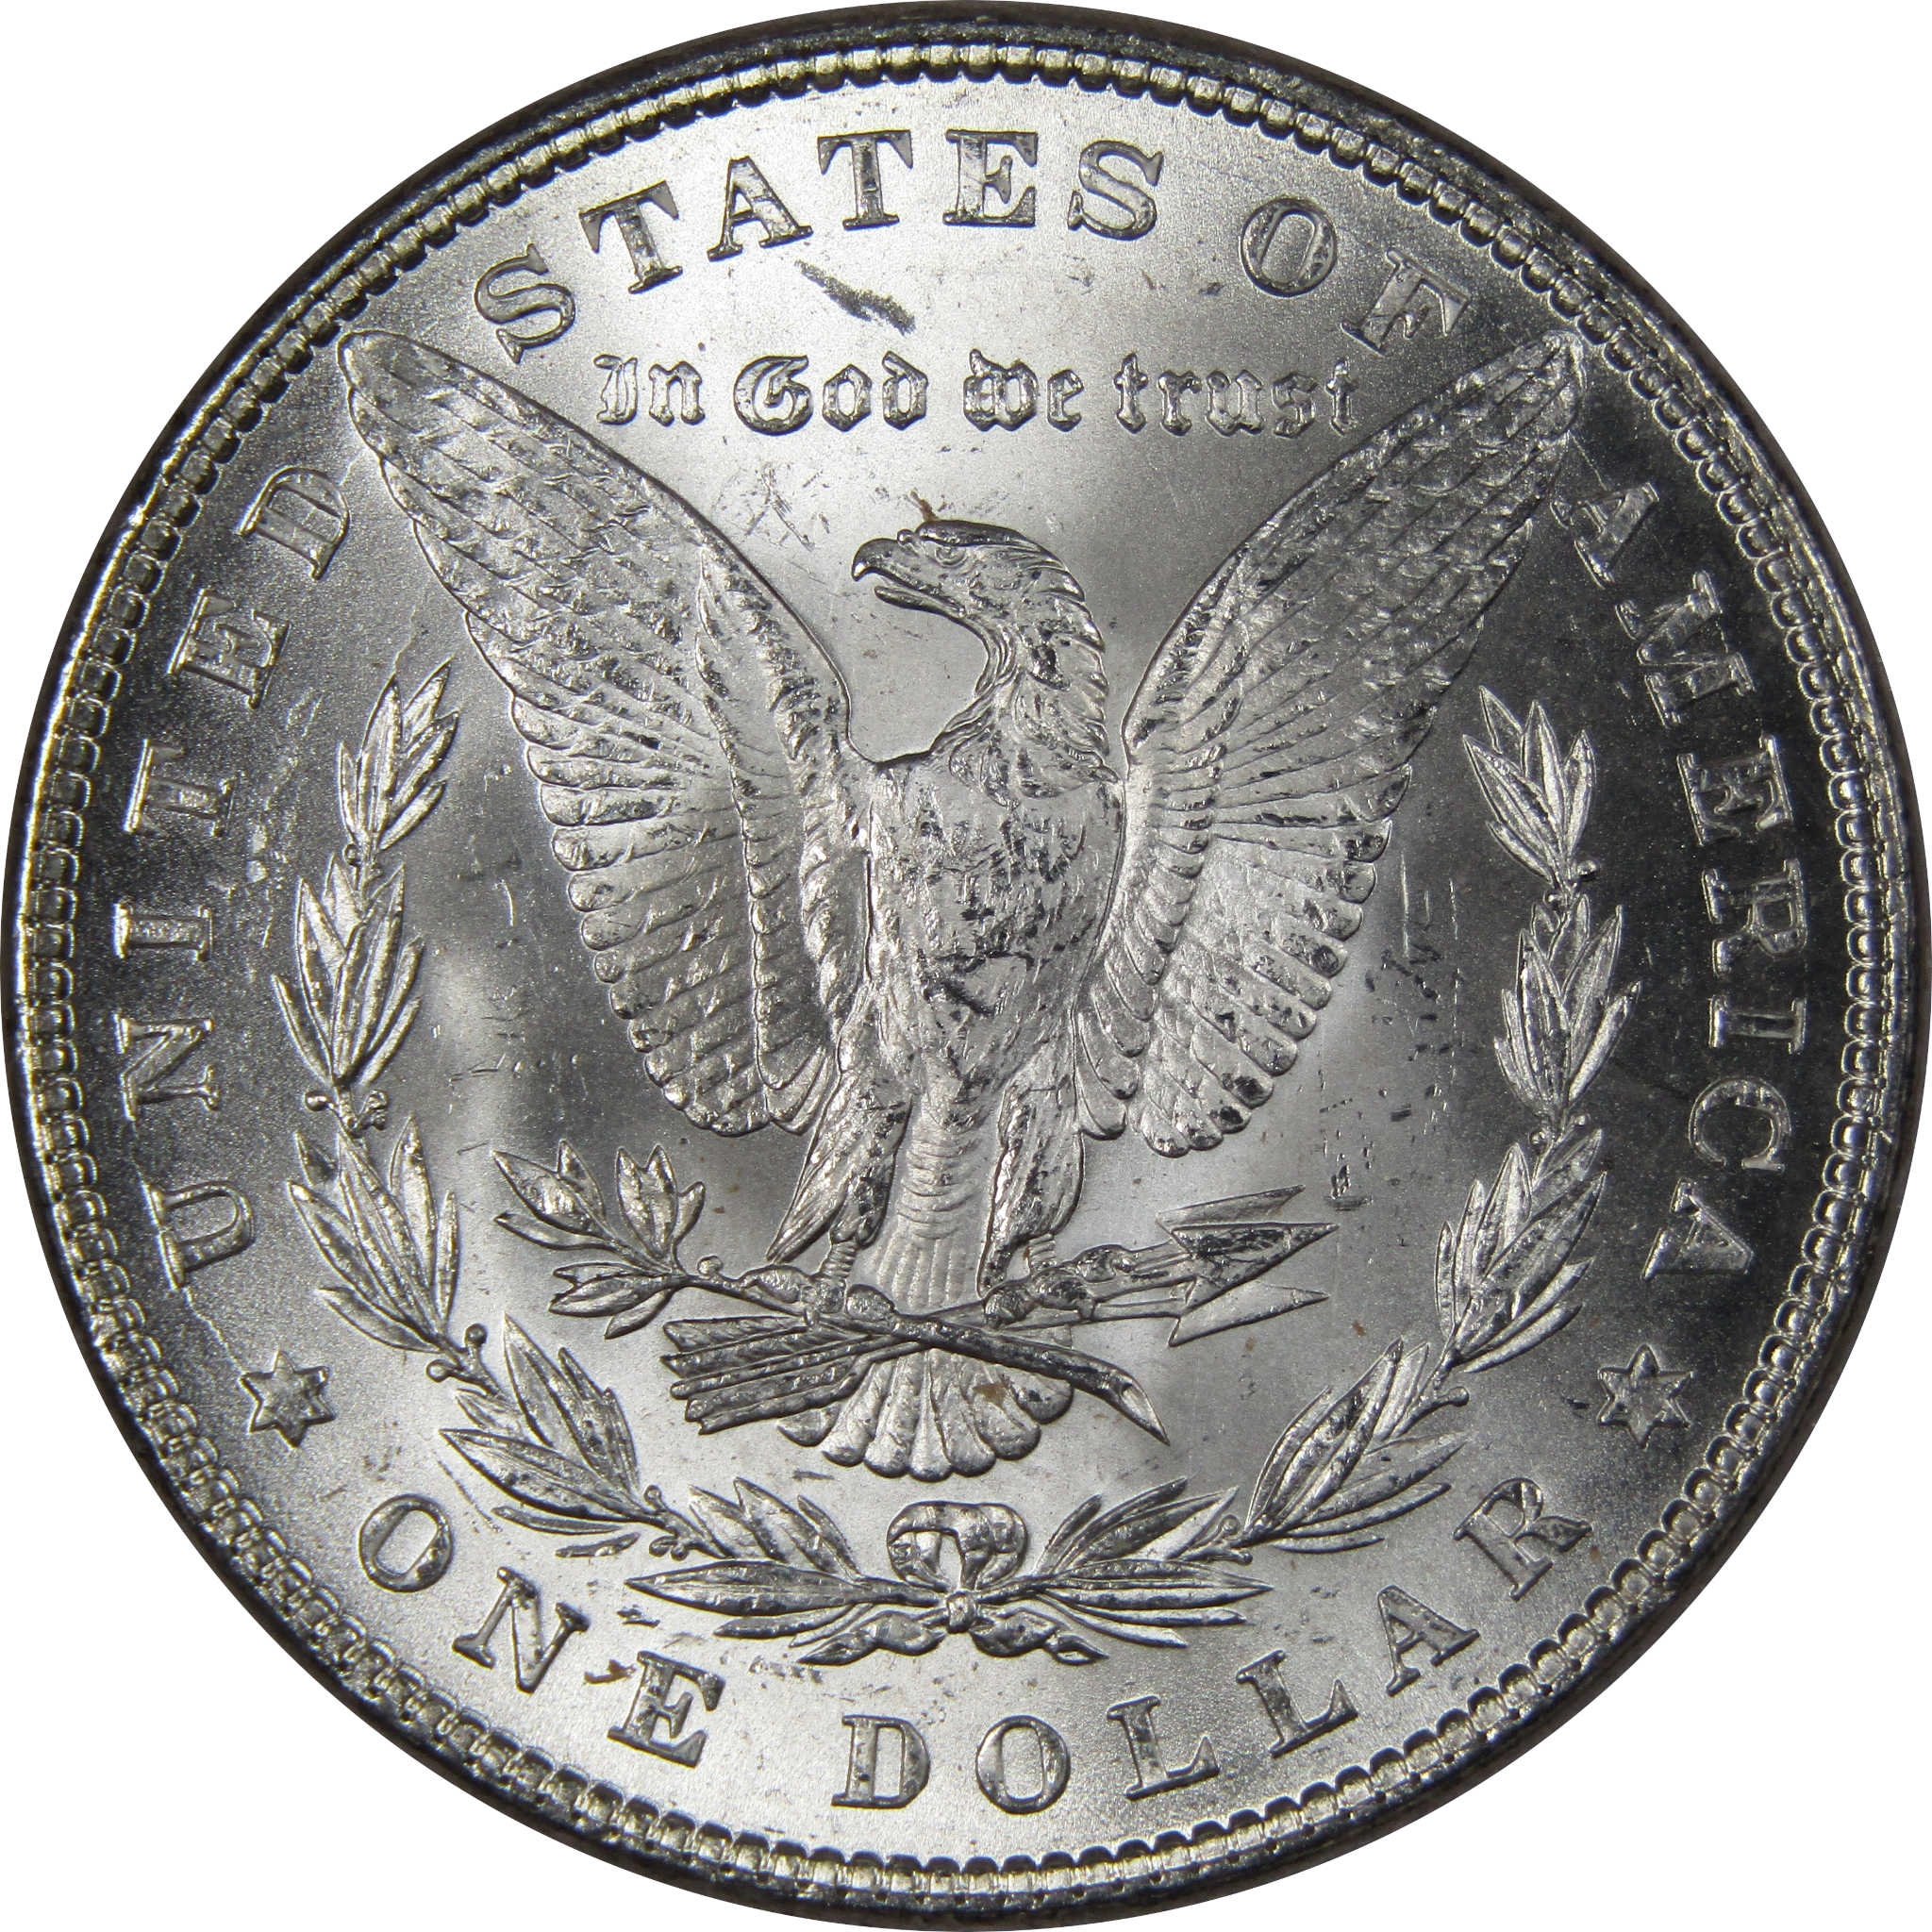 1882 Morgan Dollar BU Uncirculated Mint State 90% Silver SKU:IPC9677 - Morgan coin - Morgan silver dollar - Morgan silver dollar for sale - Profile Coins &amp; Collectibles